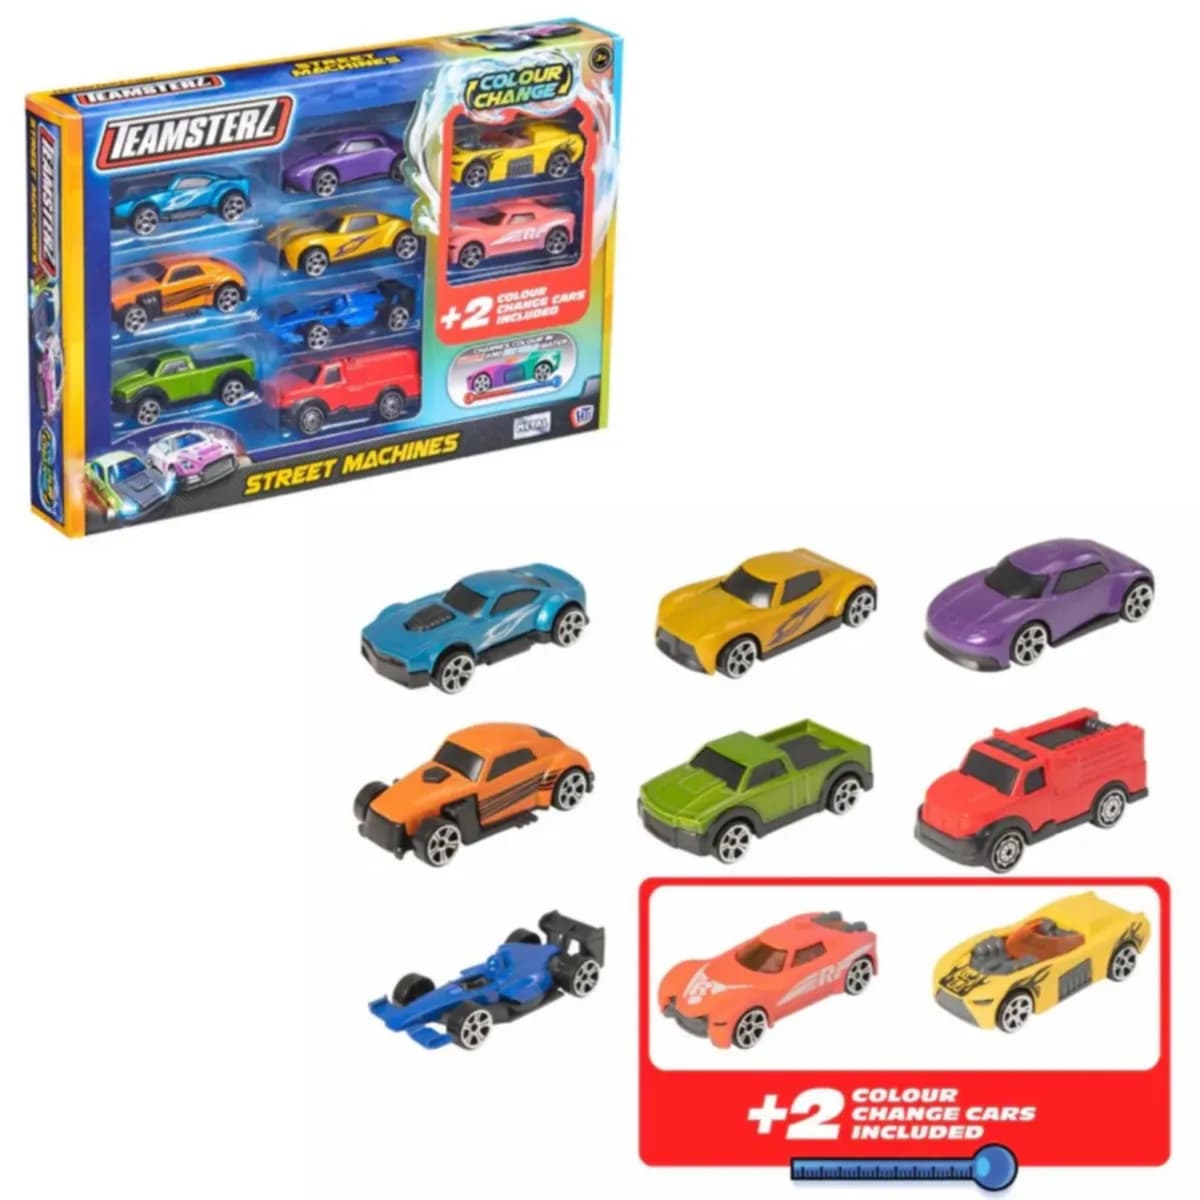 Teamsterz Street Machines Racing Cars With 2 Colour Changing Cars Collectibles Toys For Kids - CALT25 